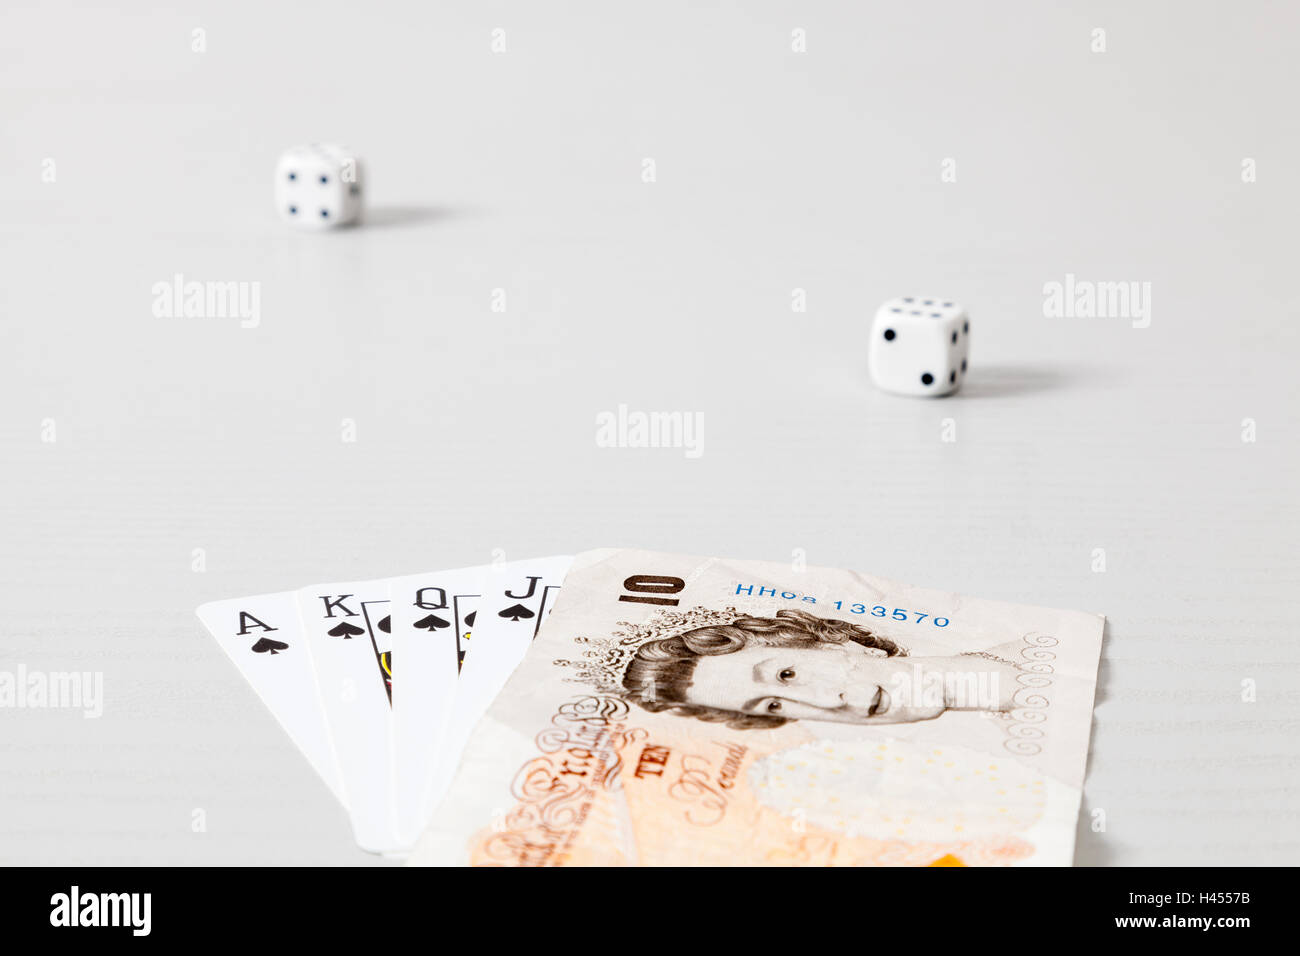 Betting or gambling concept. Dice and playing cards with £10 note instead of the ten of spades Stock Photo